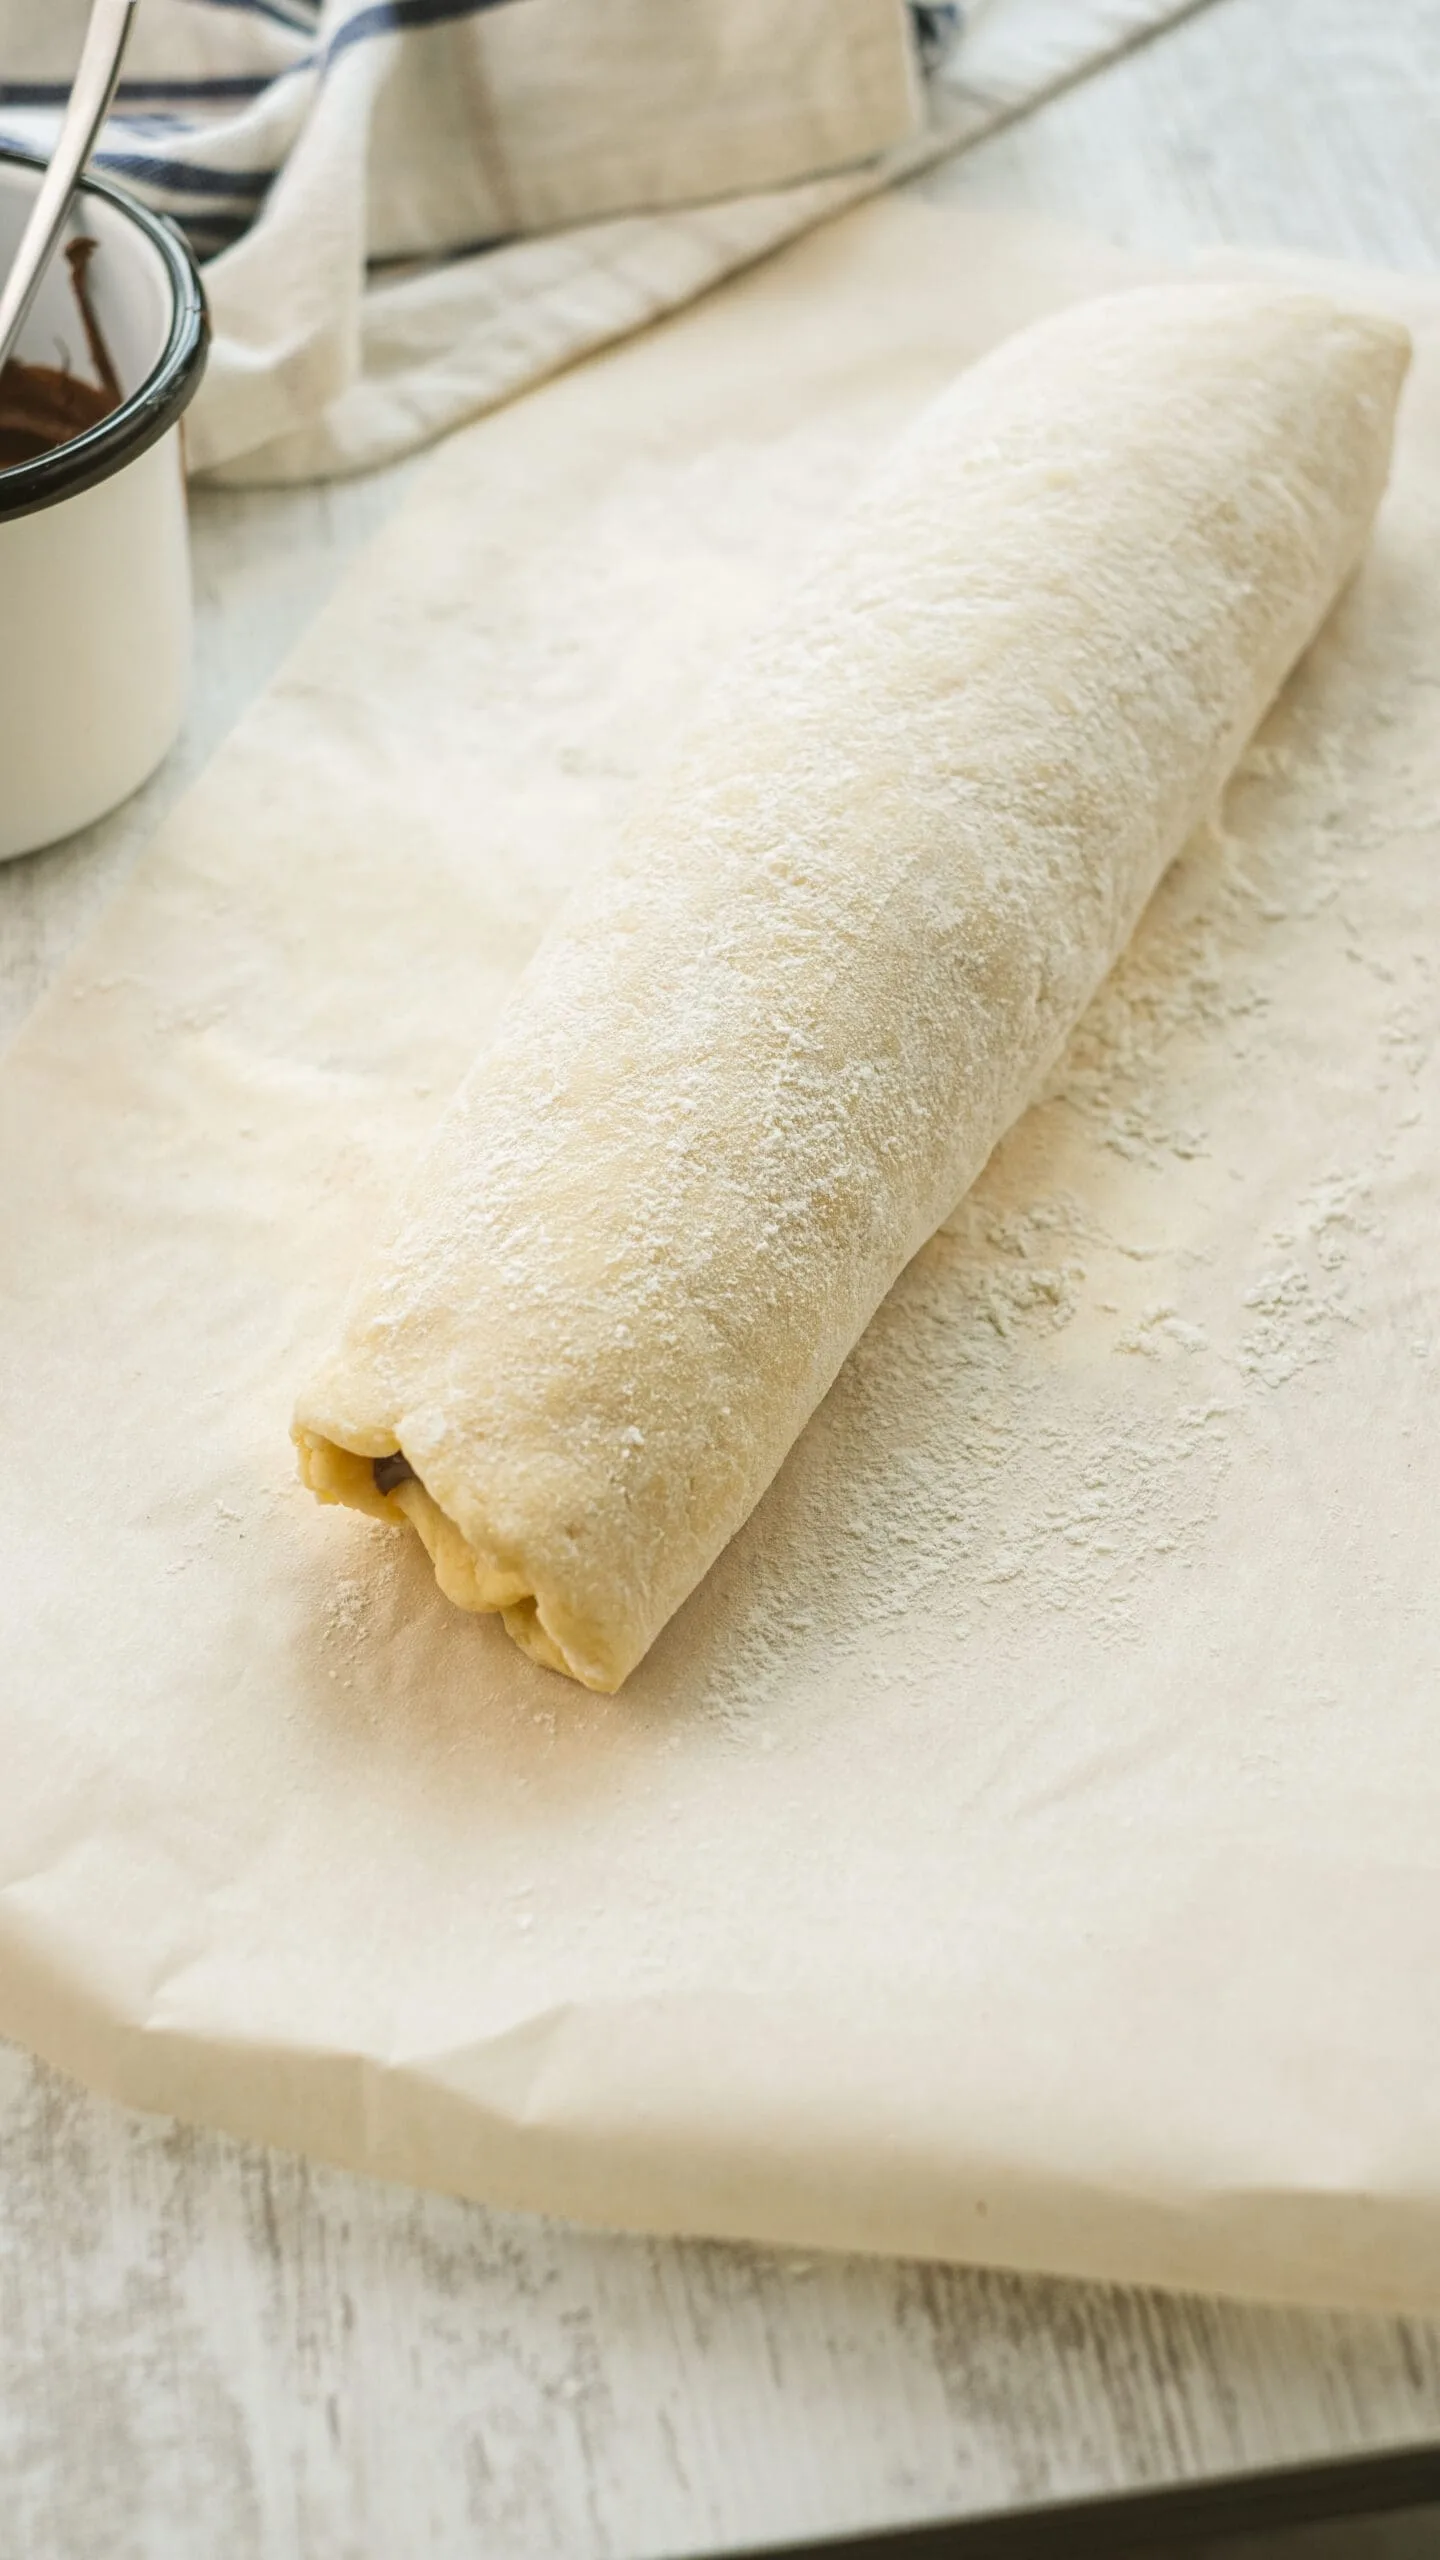 Rolled bread dough on parchment paper.